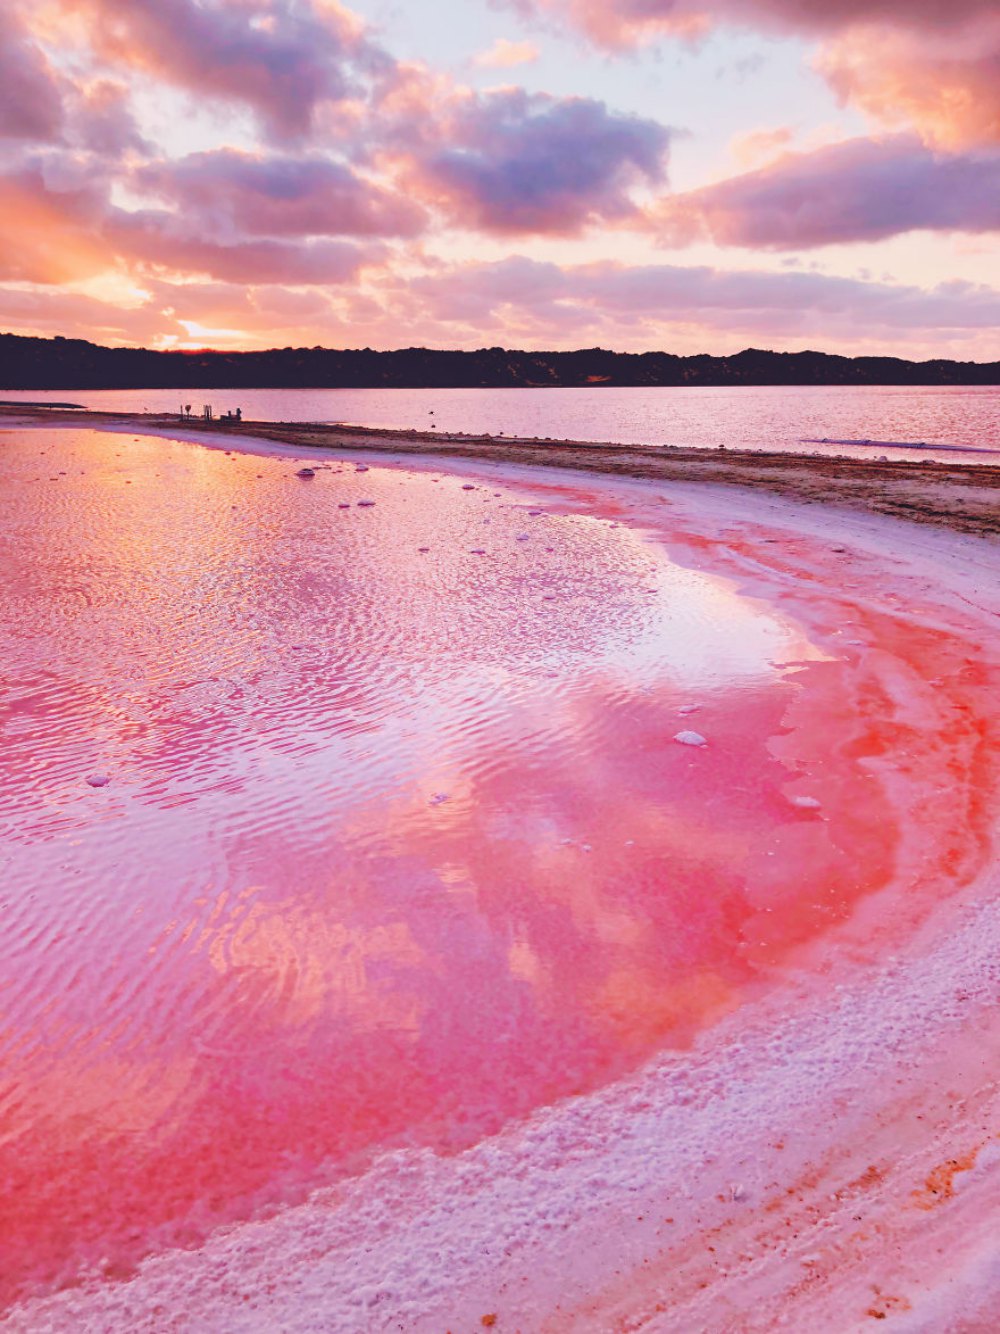 Gorgeous pictures of an exuberant pink lagoon in Western Australia captured by Kristina Makeeva